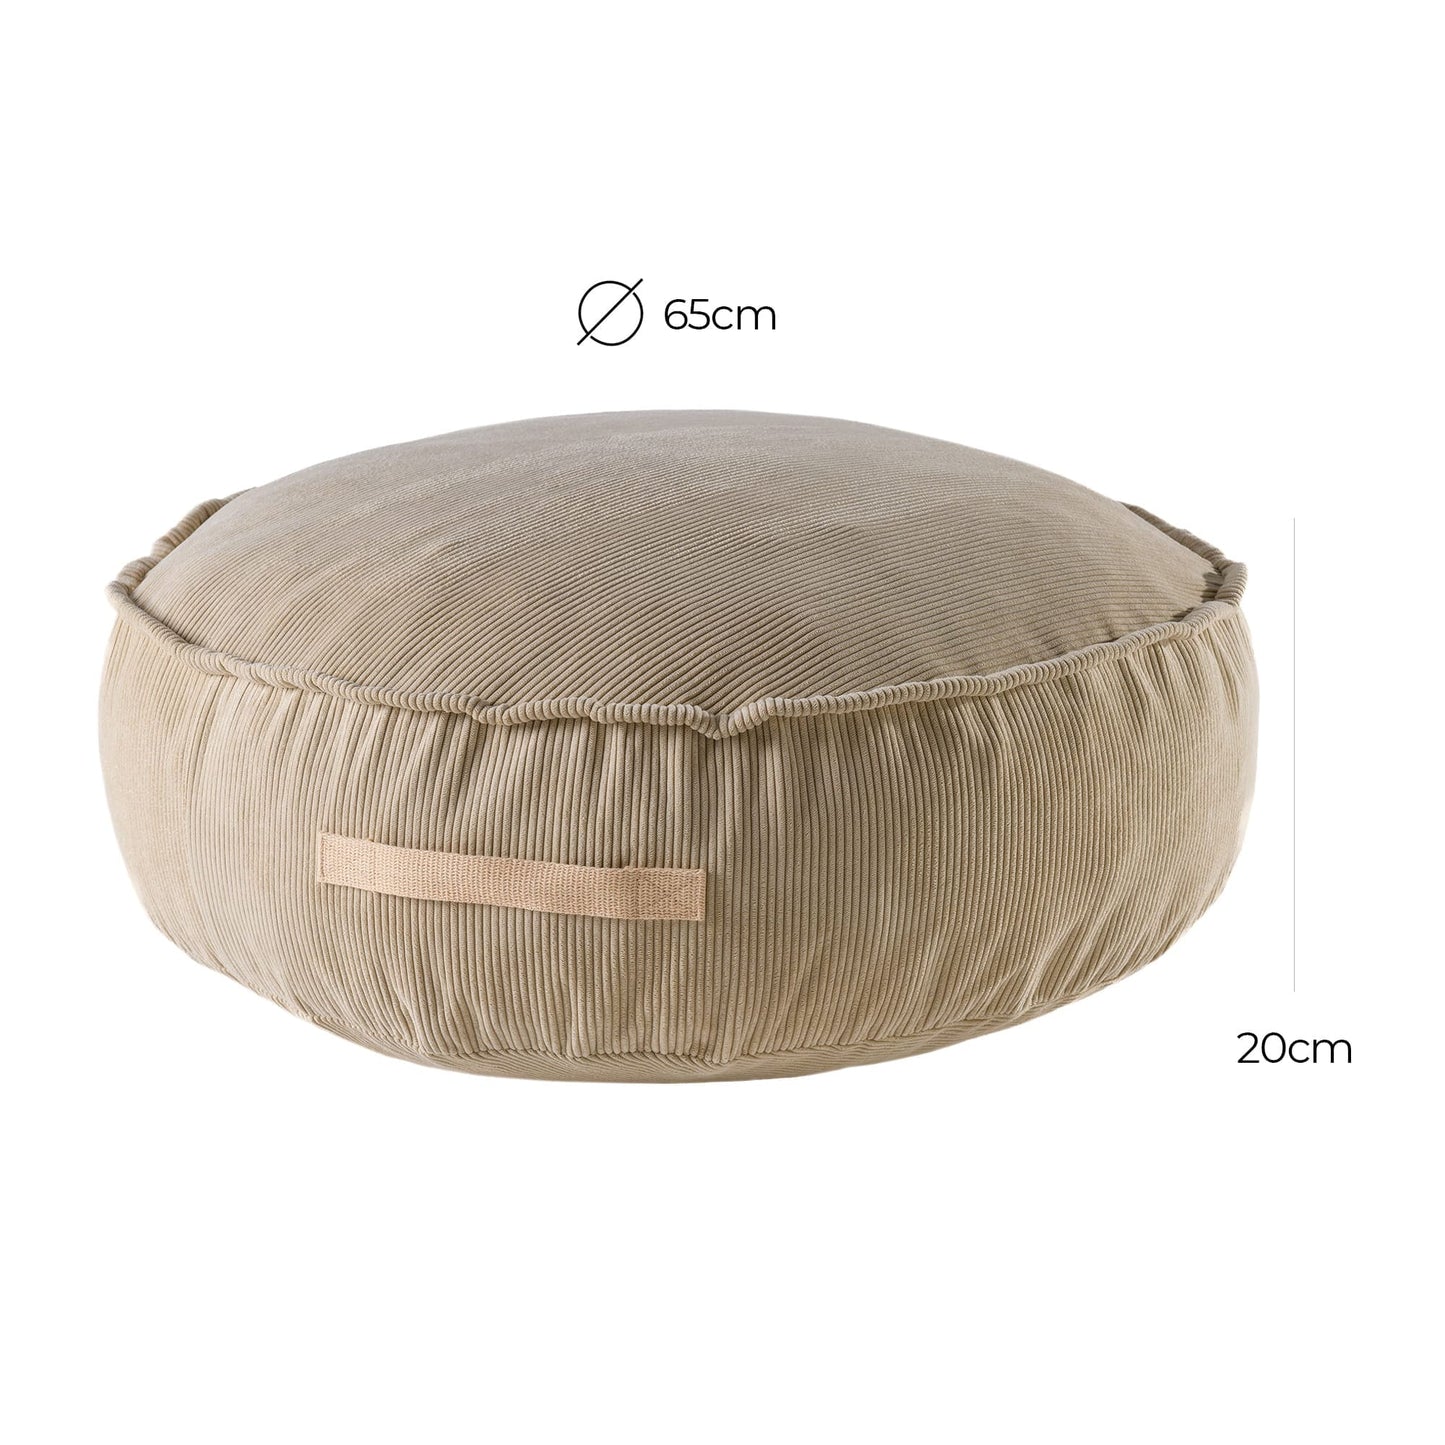 MeowBaby Corduroy Pouffe For Children - Sand dimensions